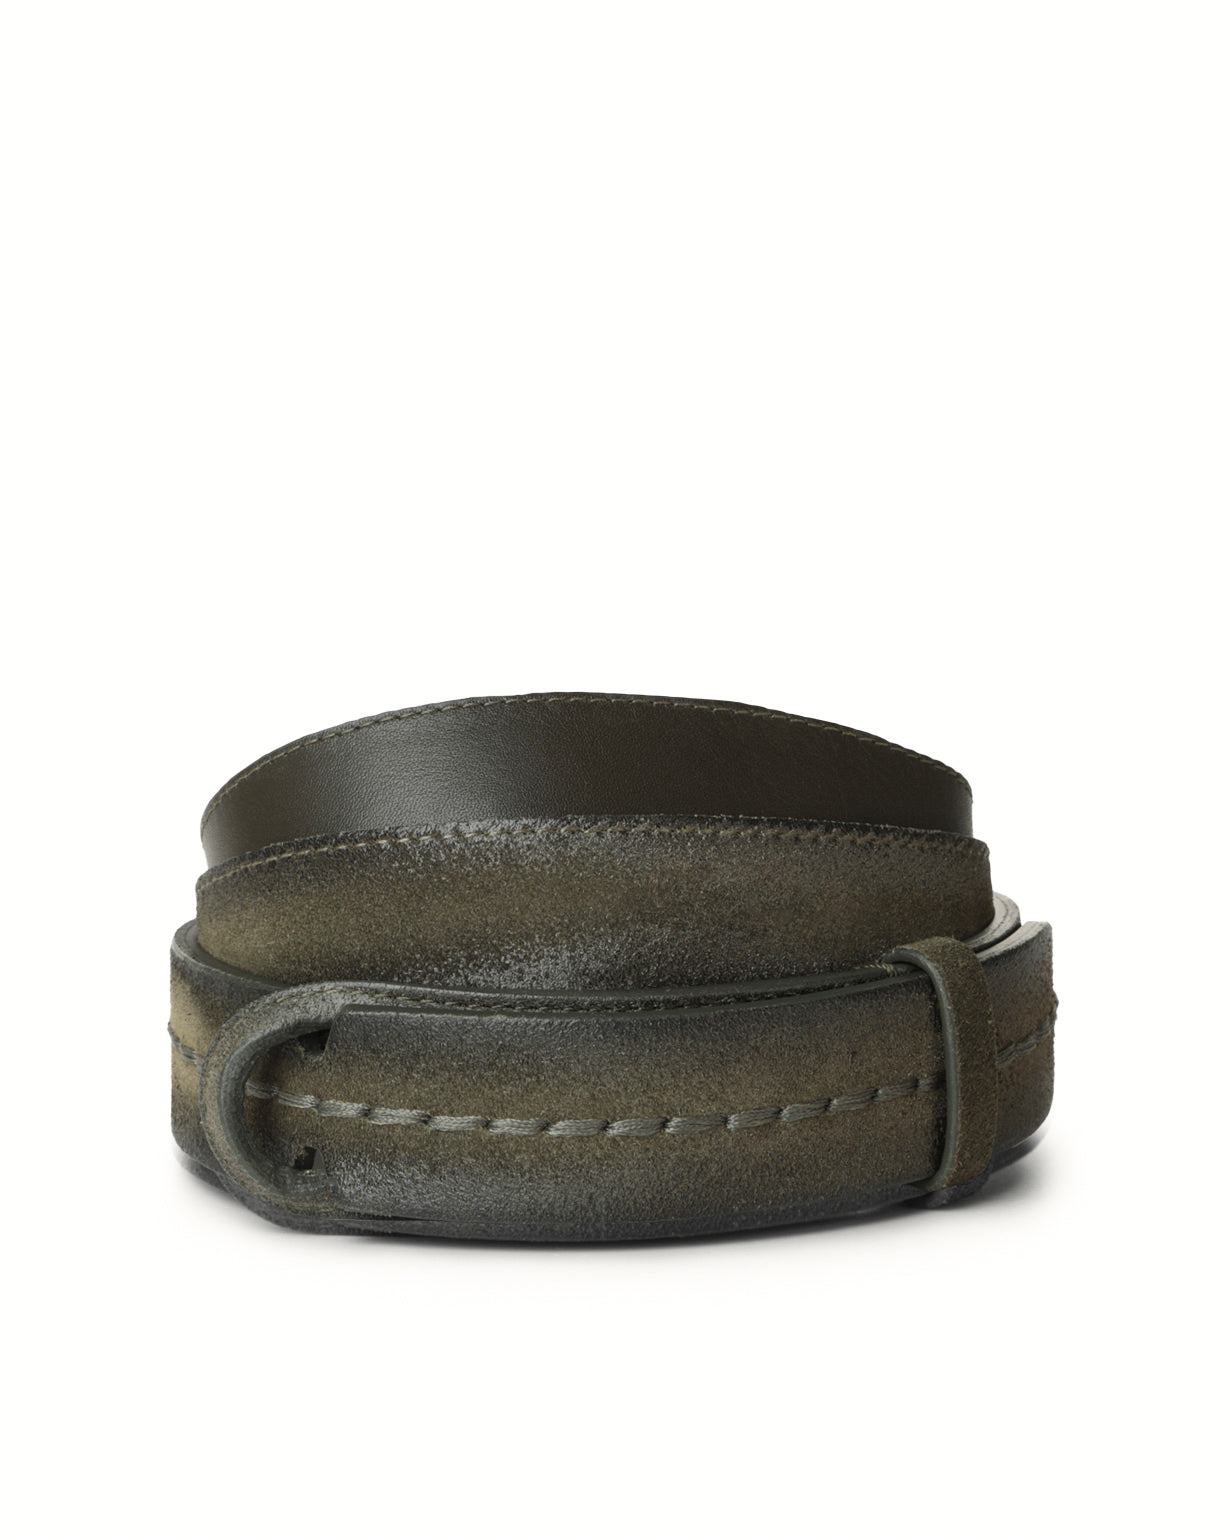 Buckleless suede belt with central stitching